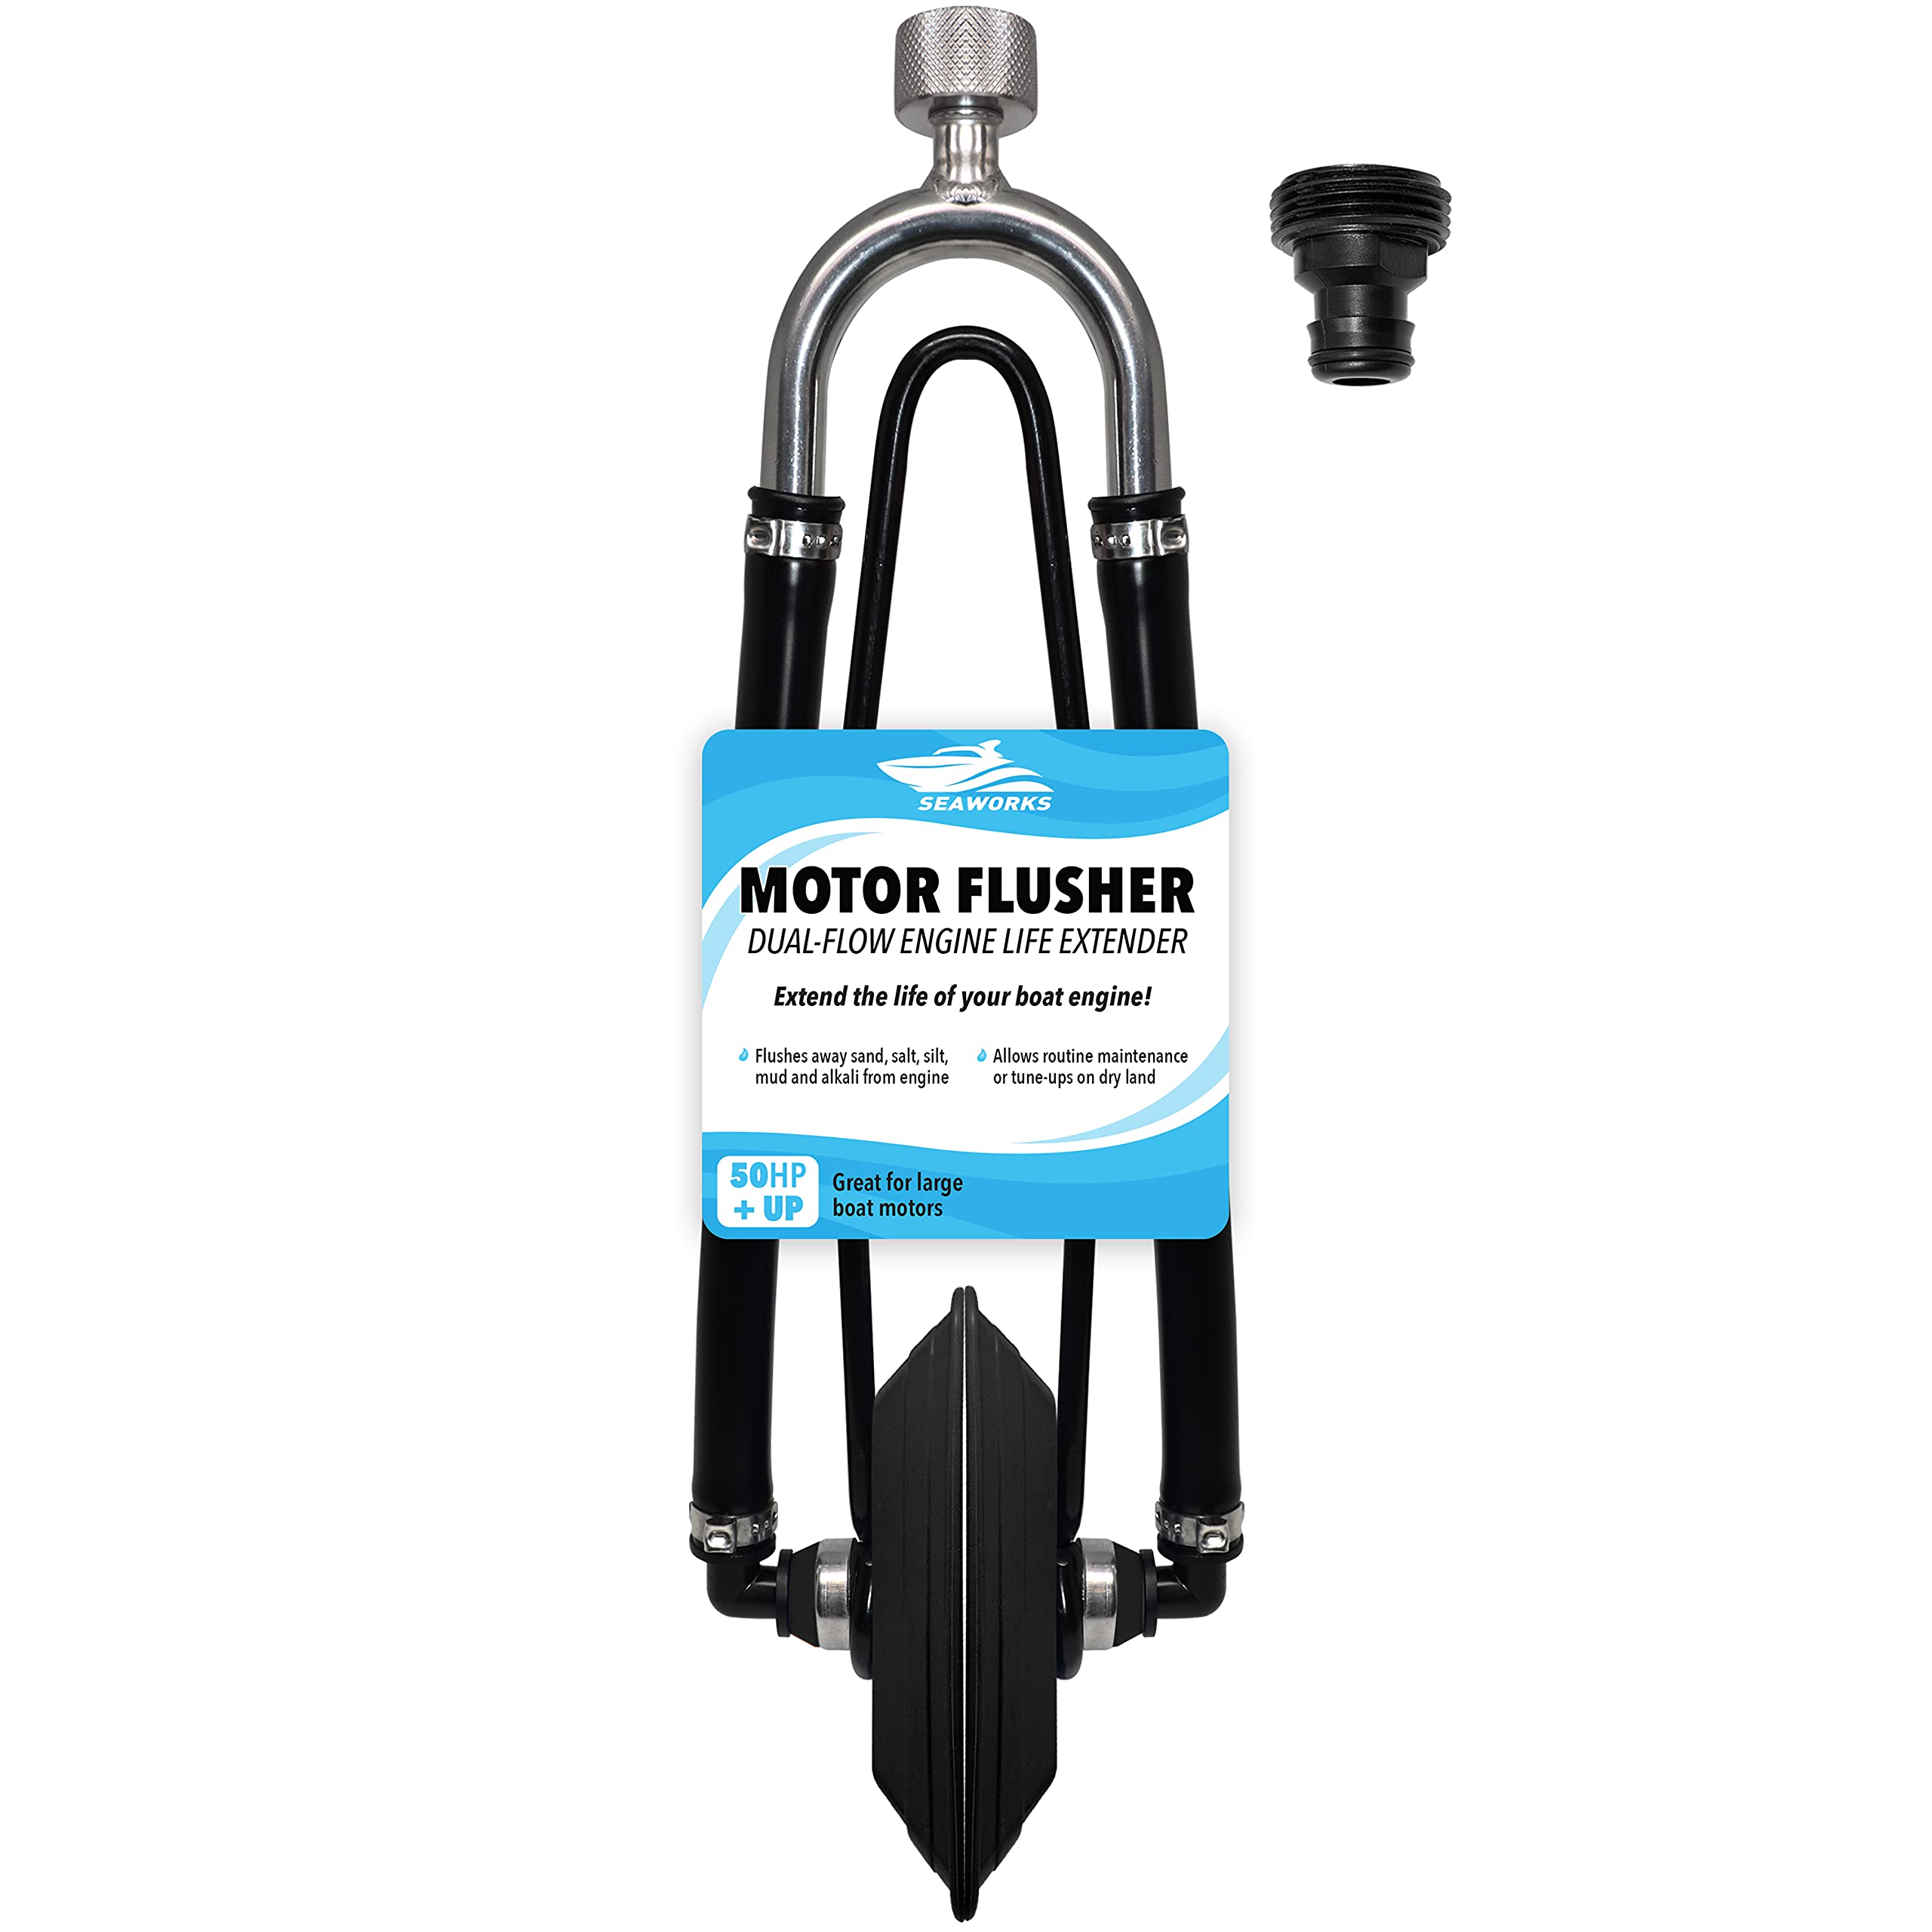 Car Wash Sprayer and Boat Engine Flush Kit | Water Hose Mixer to Get Salt  Away and Off Your Boat and Flusher for Boat Motor Muffs on Outboards &  Boats